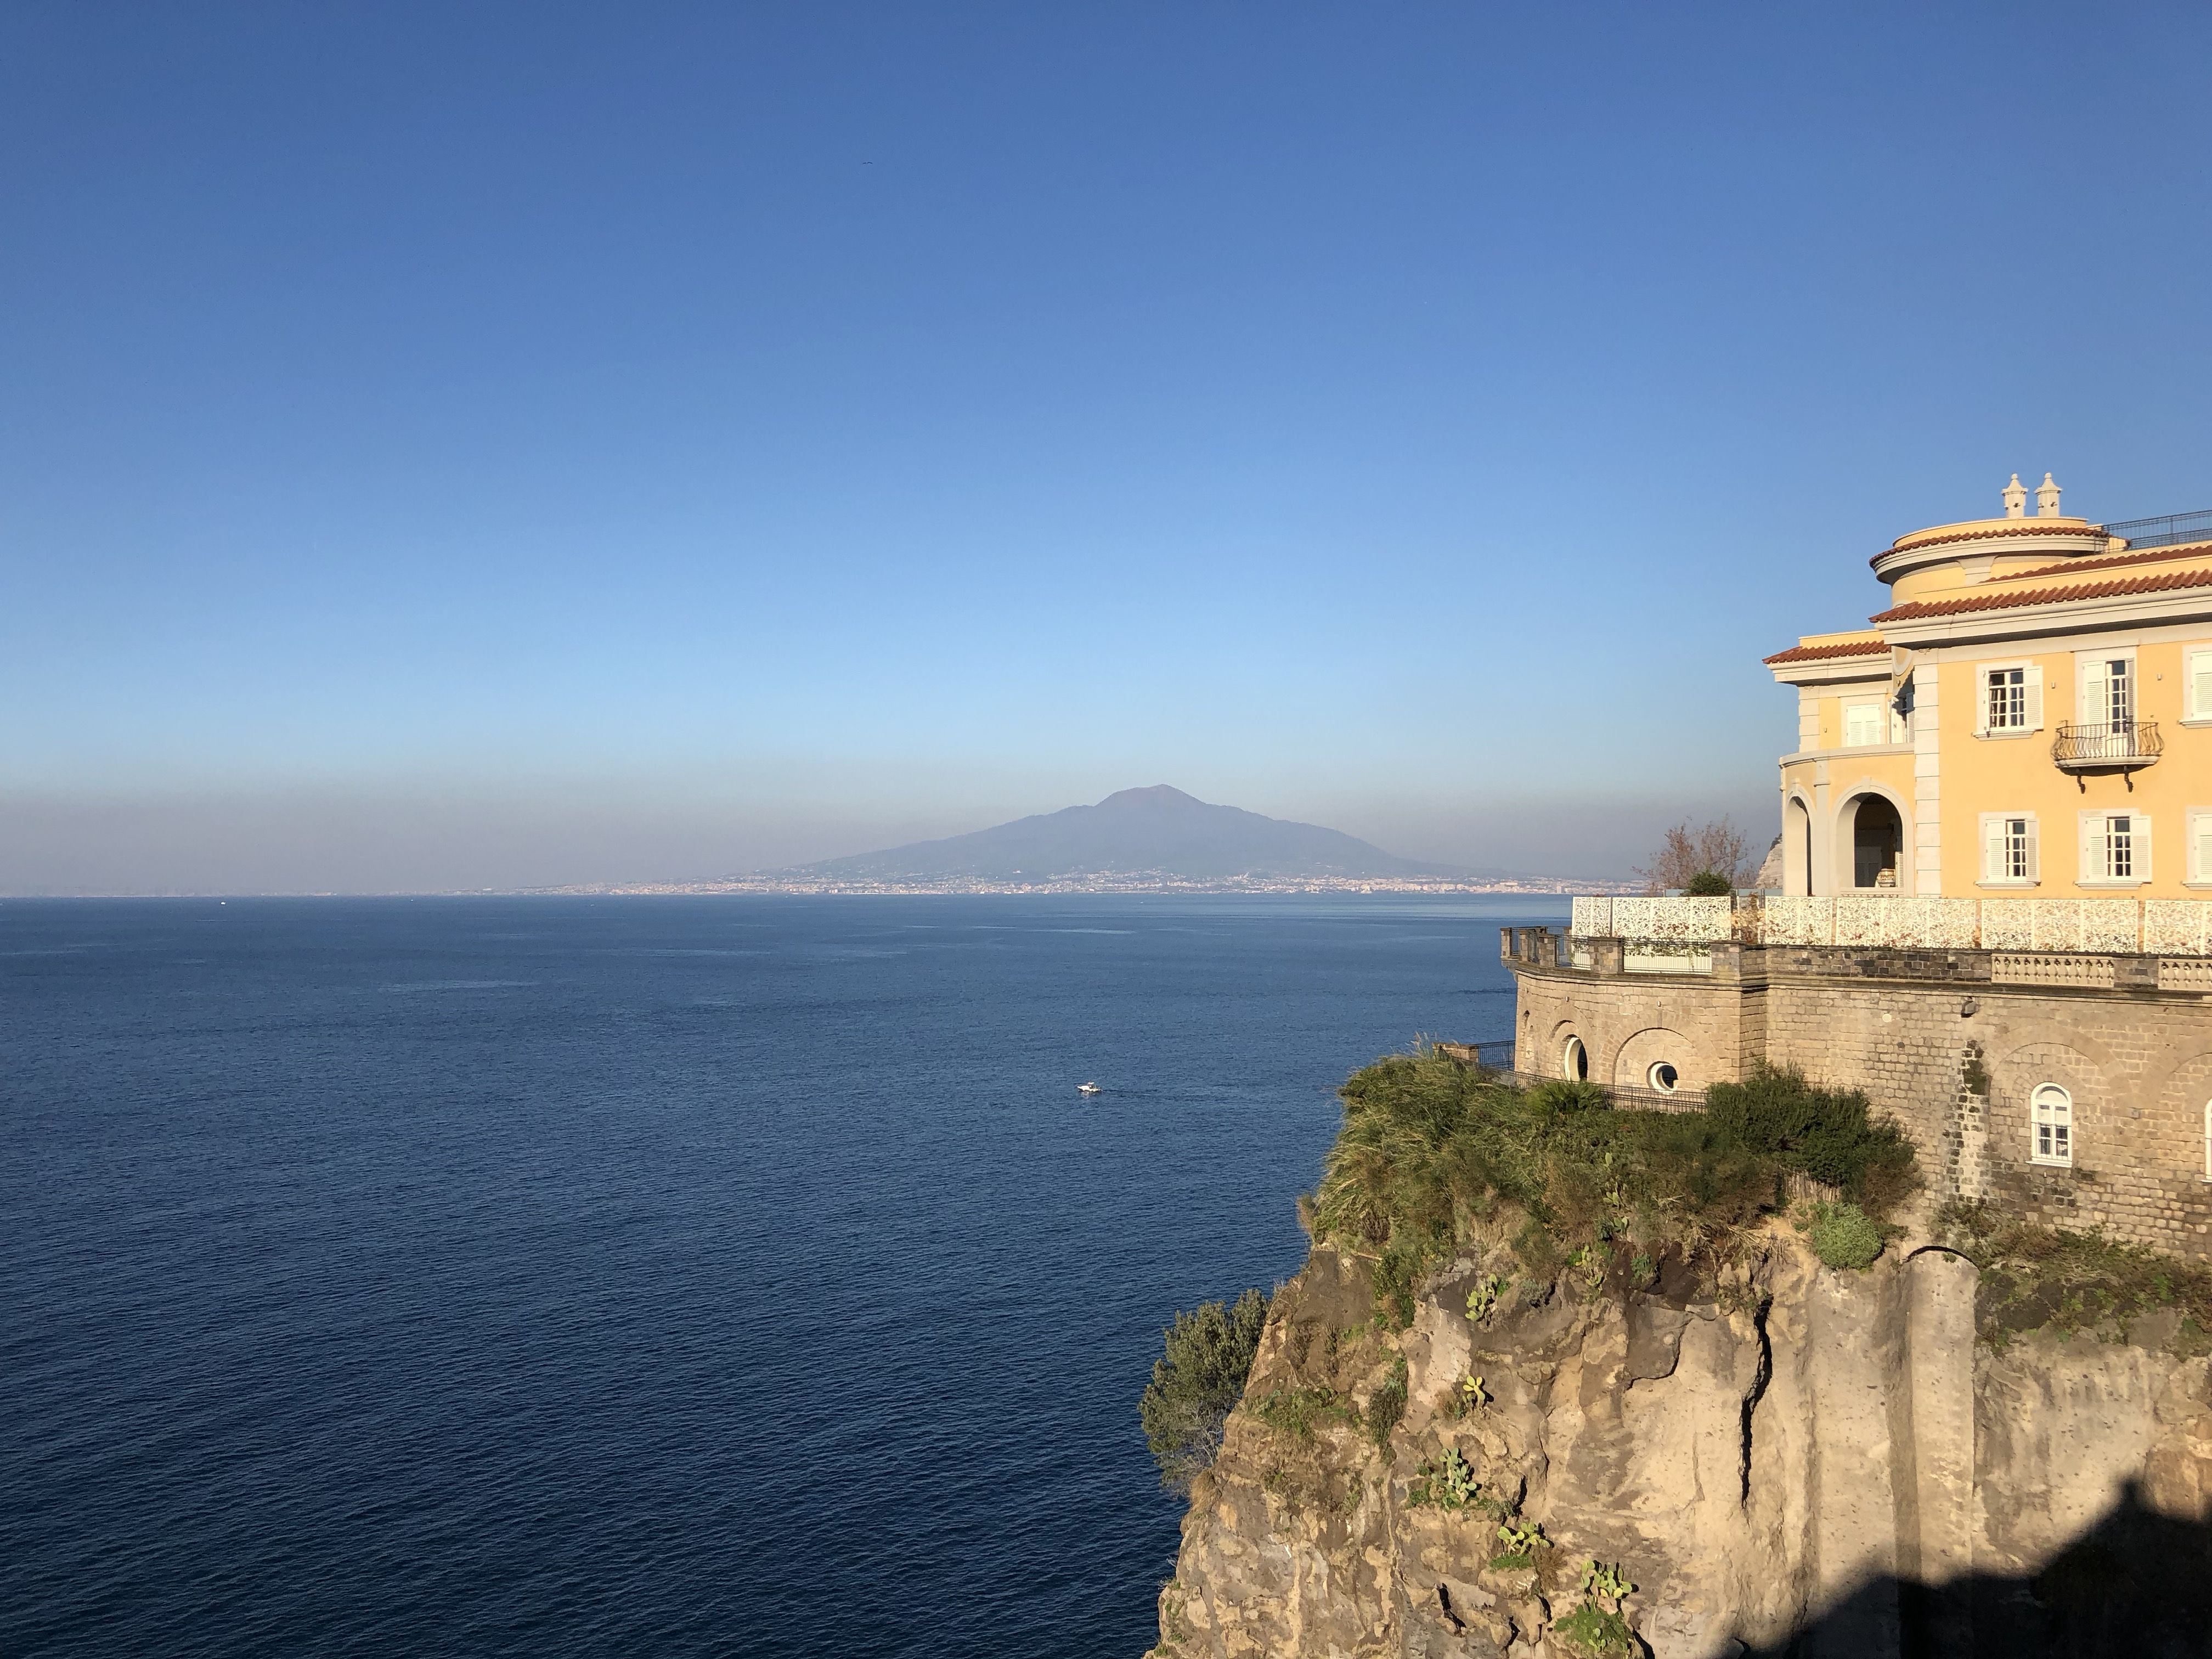 Looking across the bay at Mount Vesuvius, the base of which is  wreathed with brown smog. On the left, perched on a cliff,  is a pale yellow hotel.